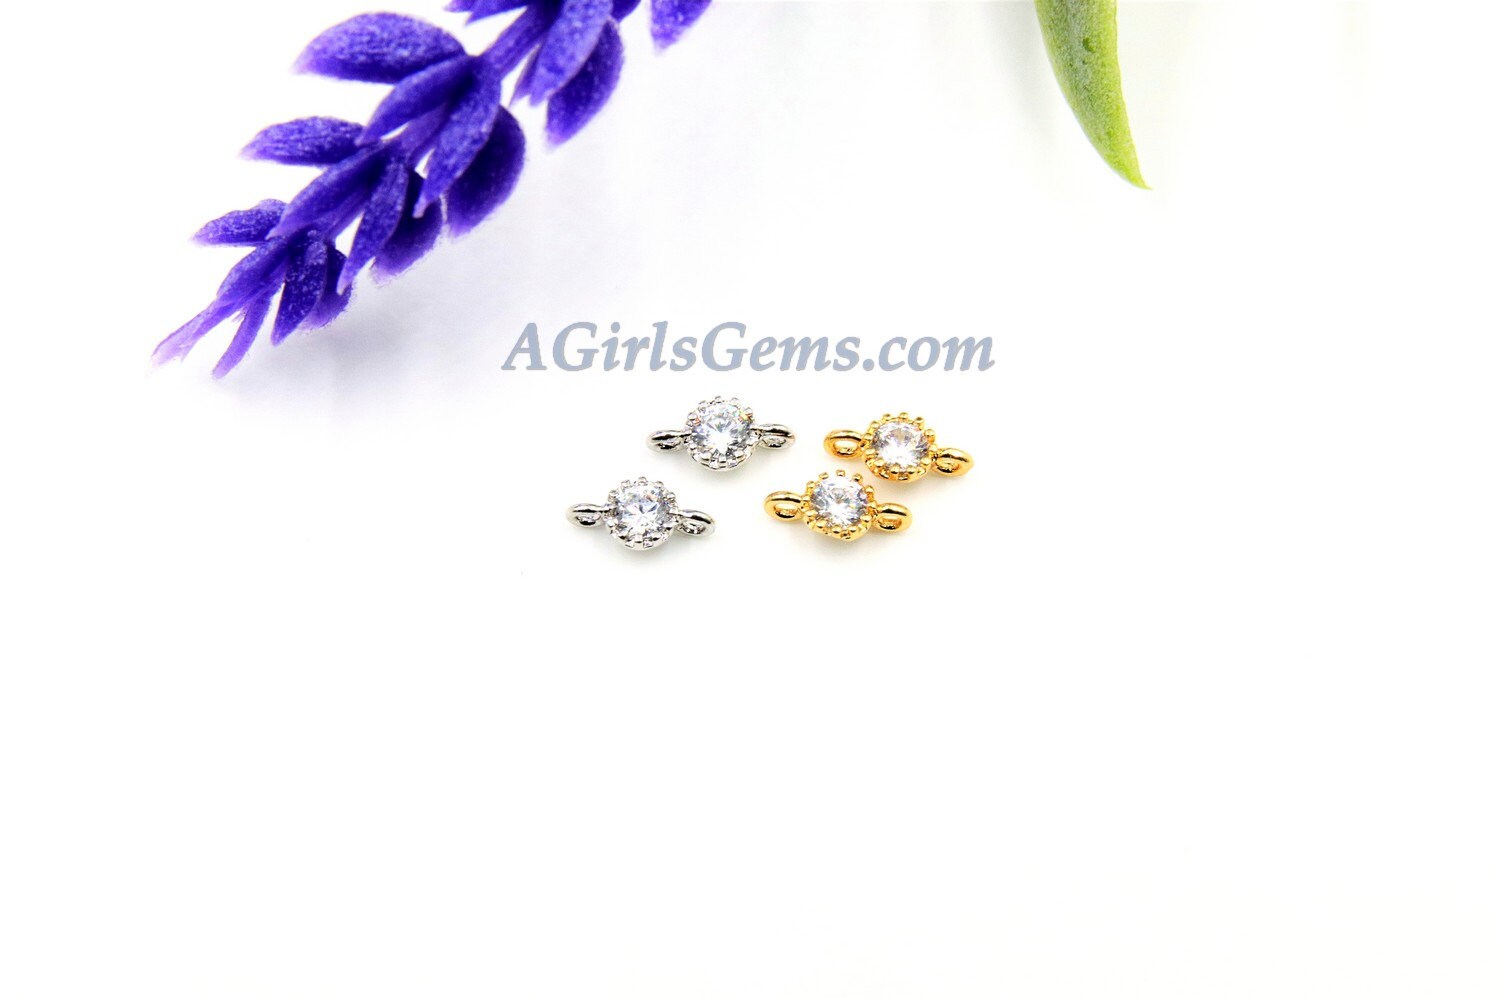 Cubic Zirconia Solitaire Connectors Links - 2 Pcs 4 mm CZ Jewelry Findings #297, 4 x 7 mm Tiny Charms for Earrings/Lariats Cz Micro Pave